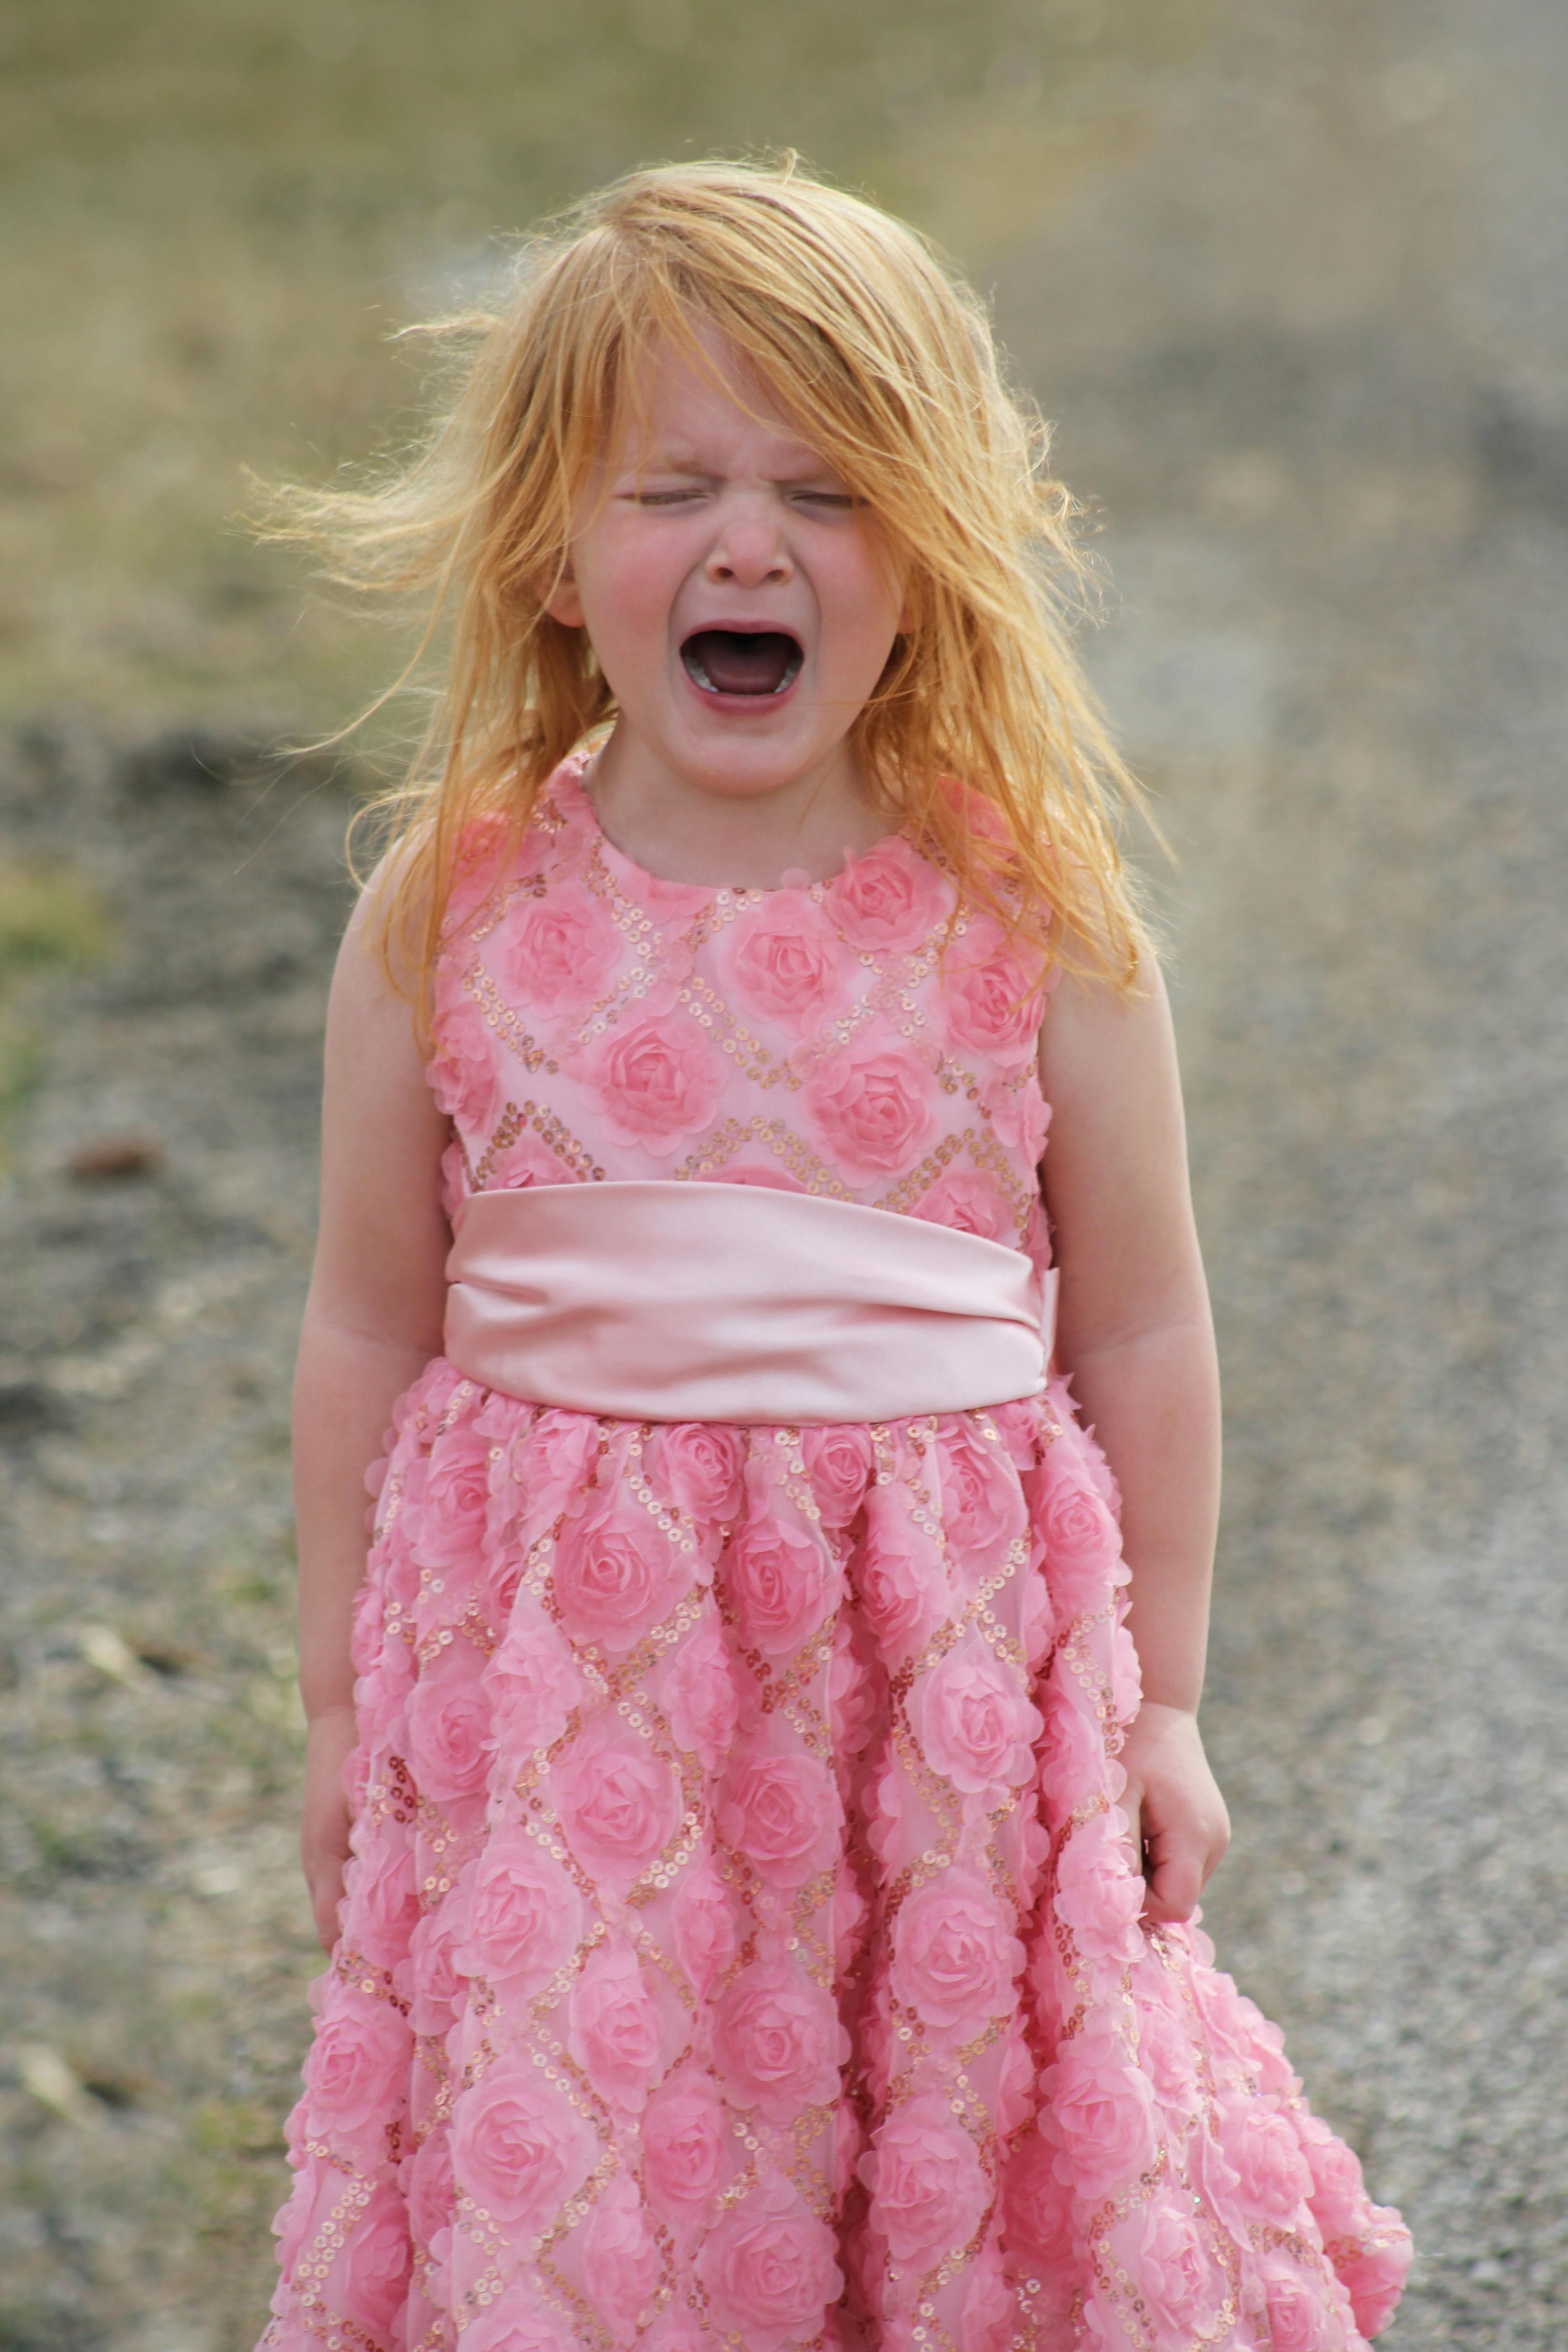 A little girl crying while outside | Source: Pexels